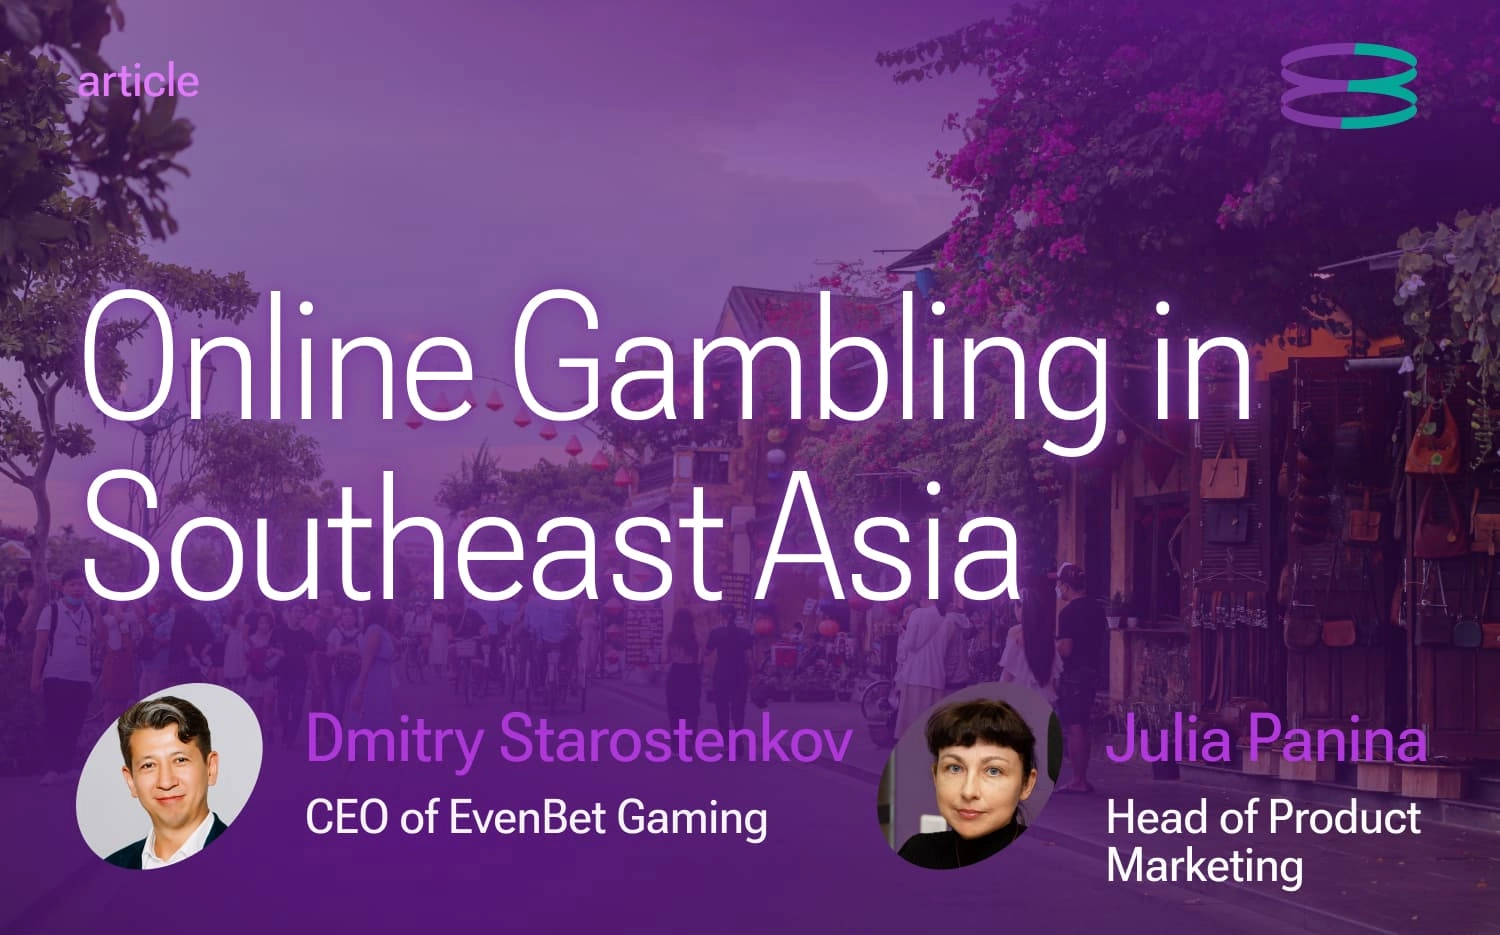 Features of the Online Gambling Market in Southeast Asia